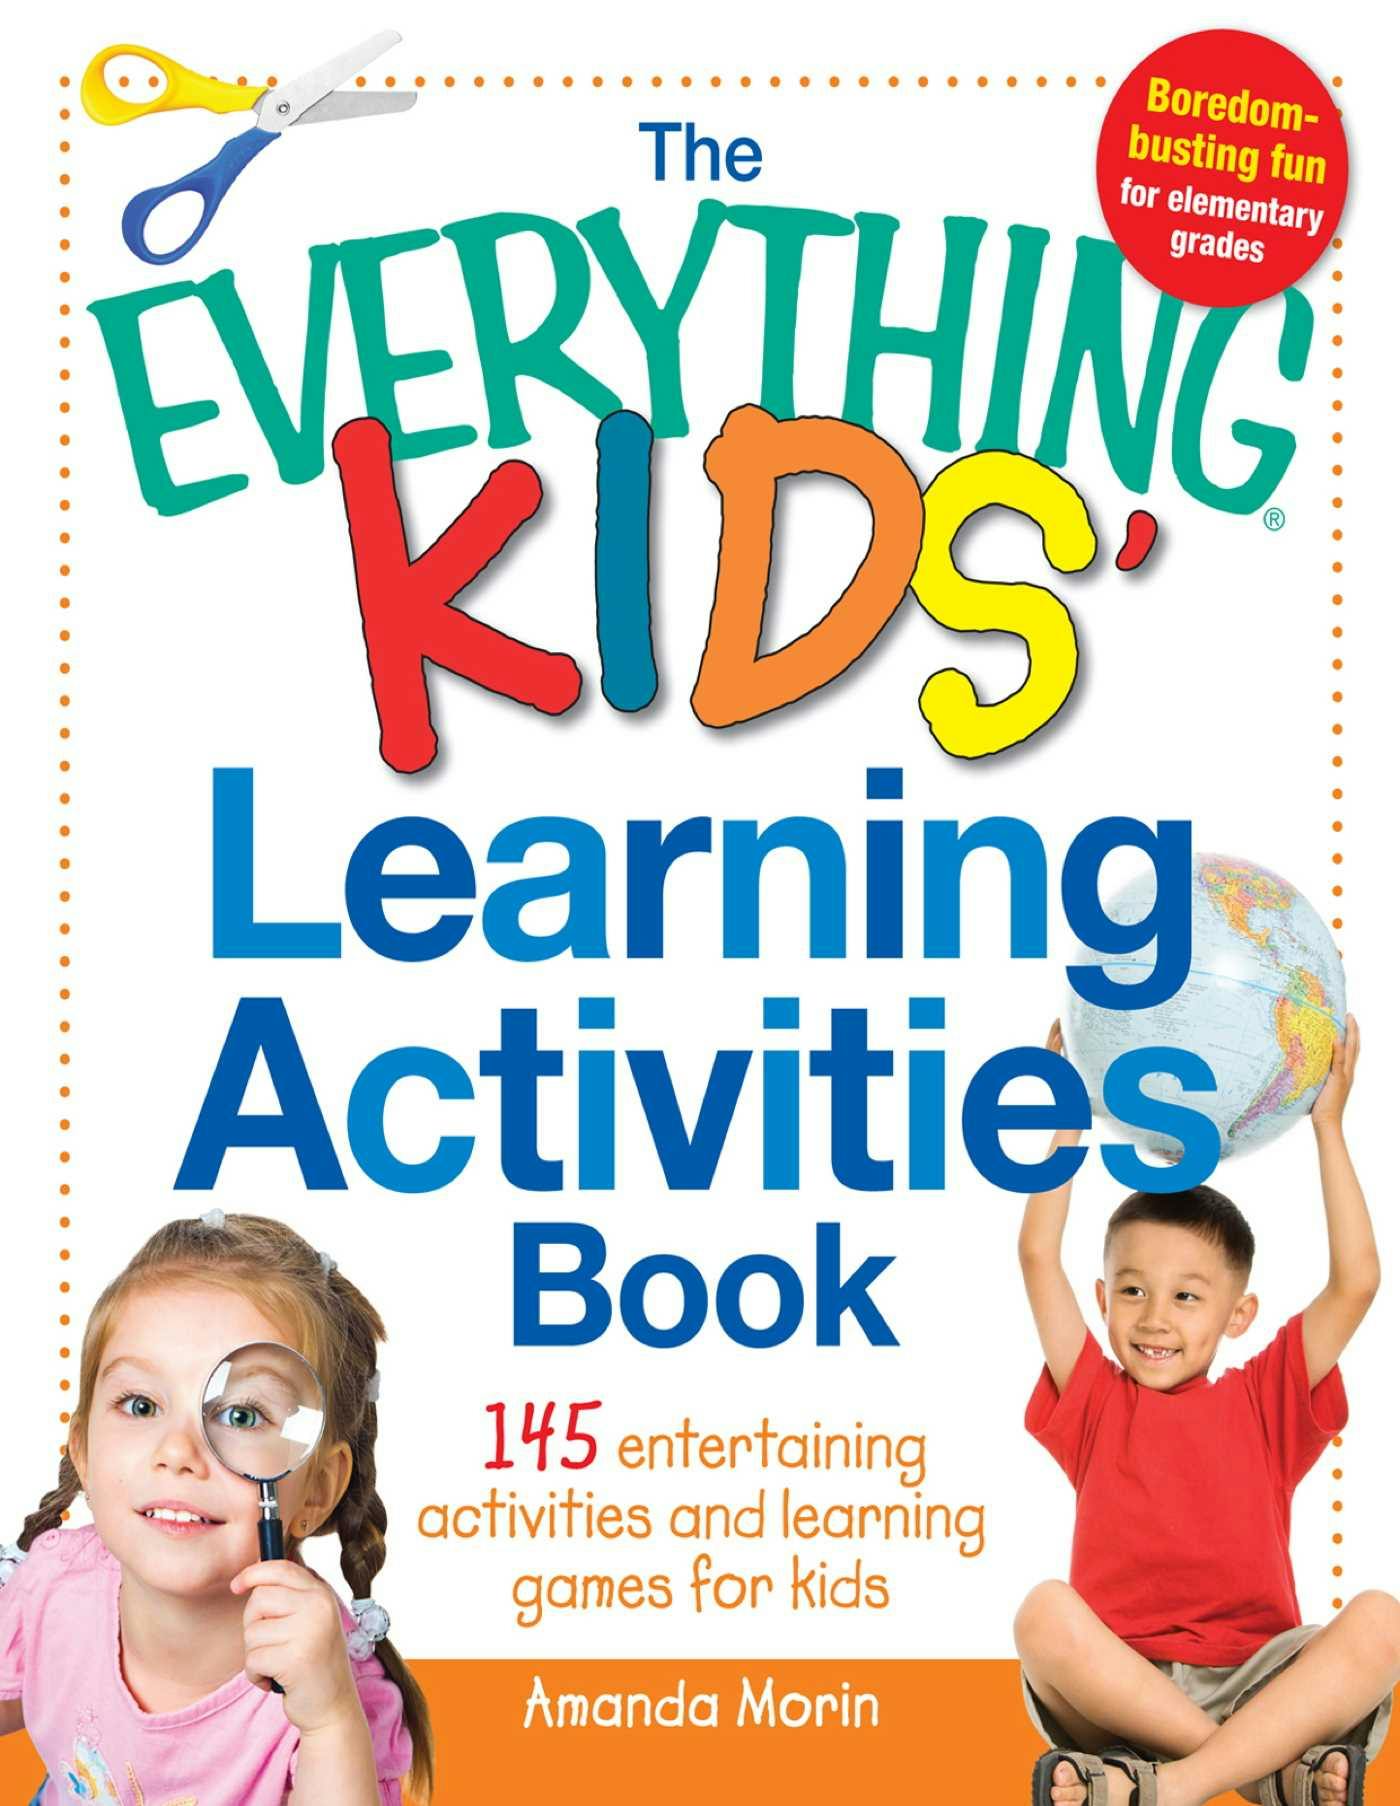 The Everything Kids' Learning Activities Book: 145 Entertaining Activities and Learning Games for Kids - Amanda Morin